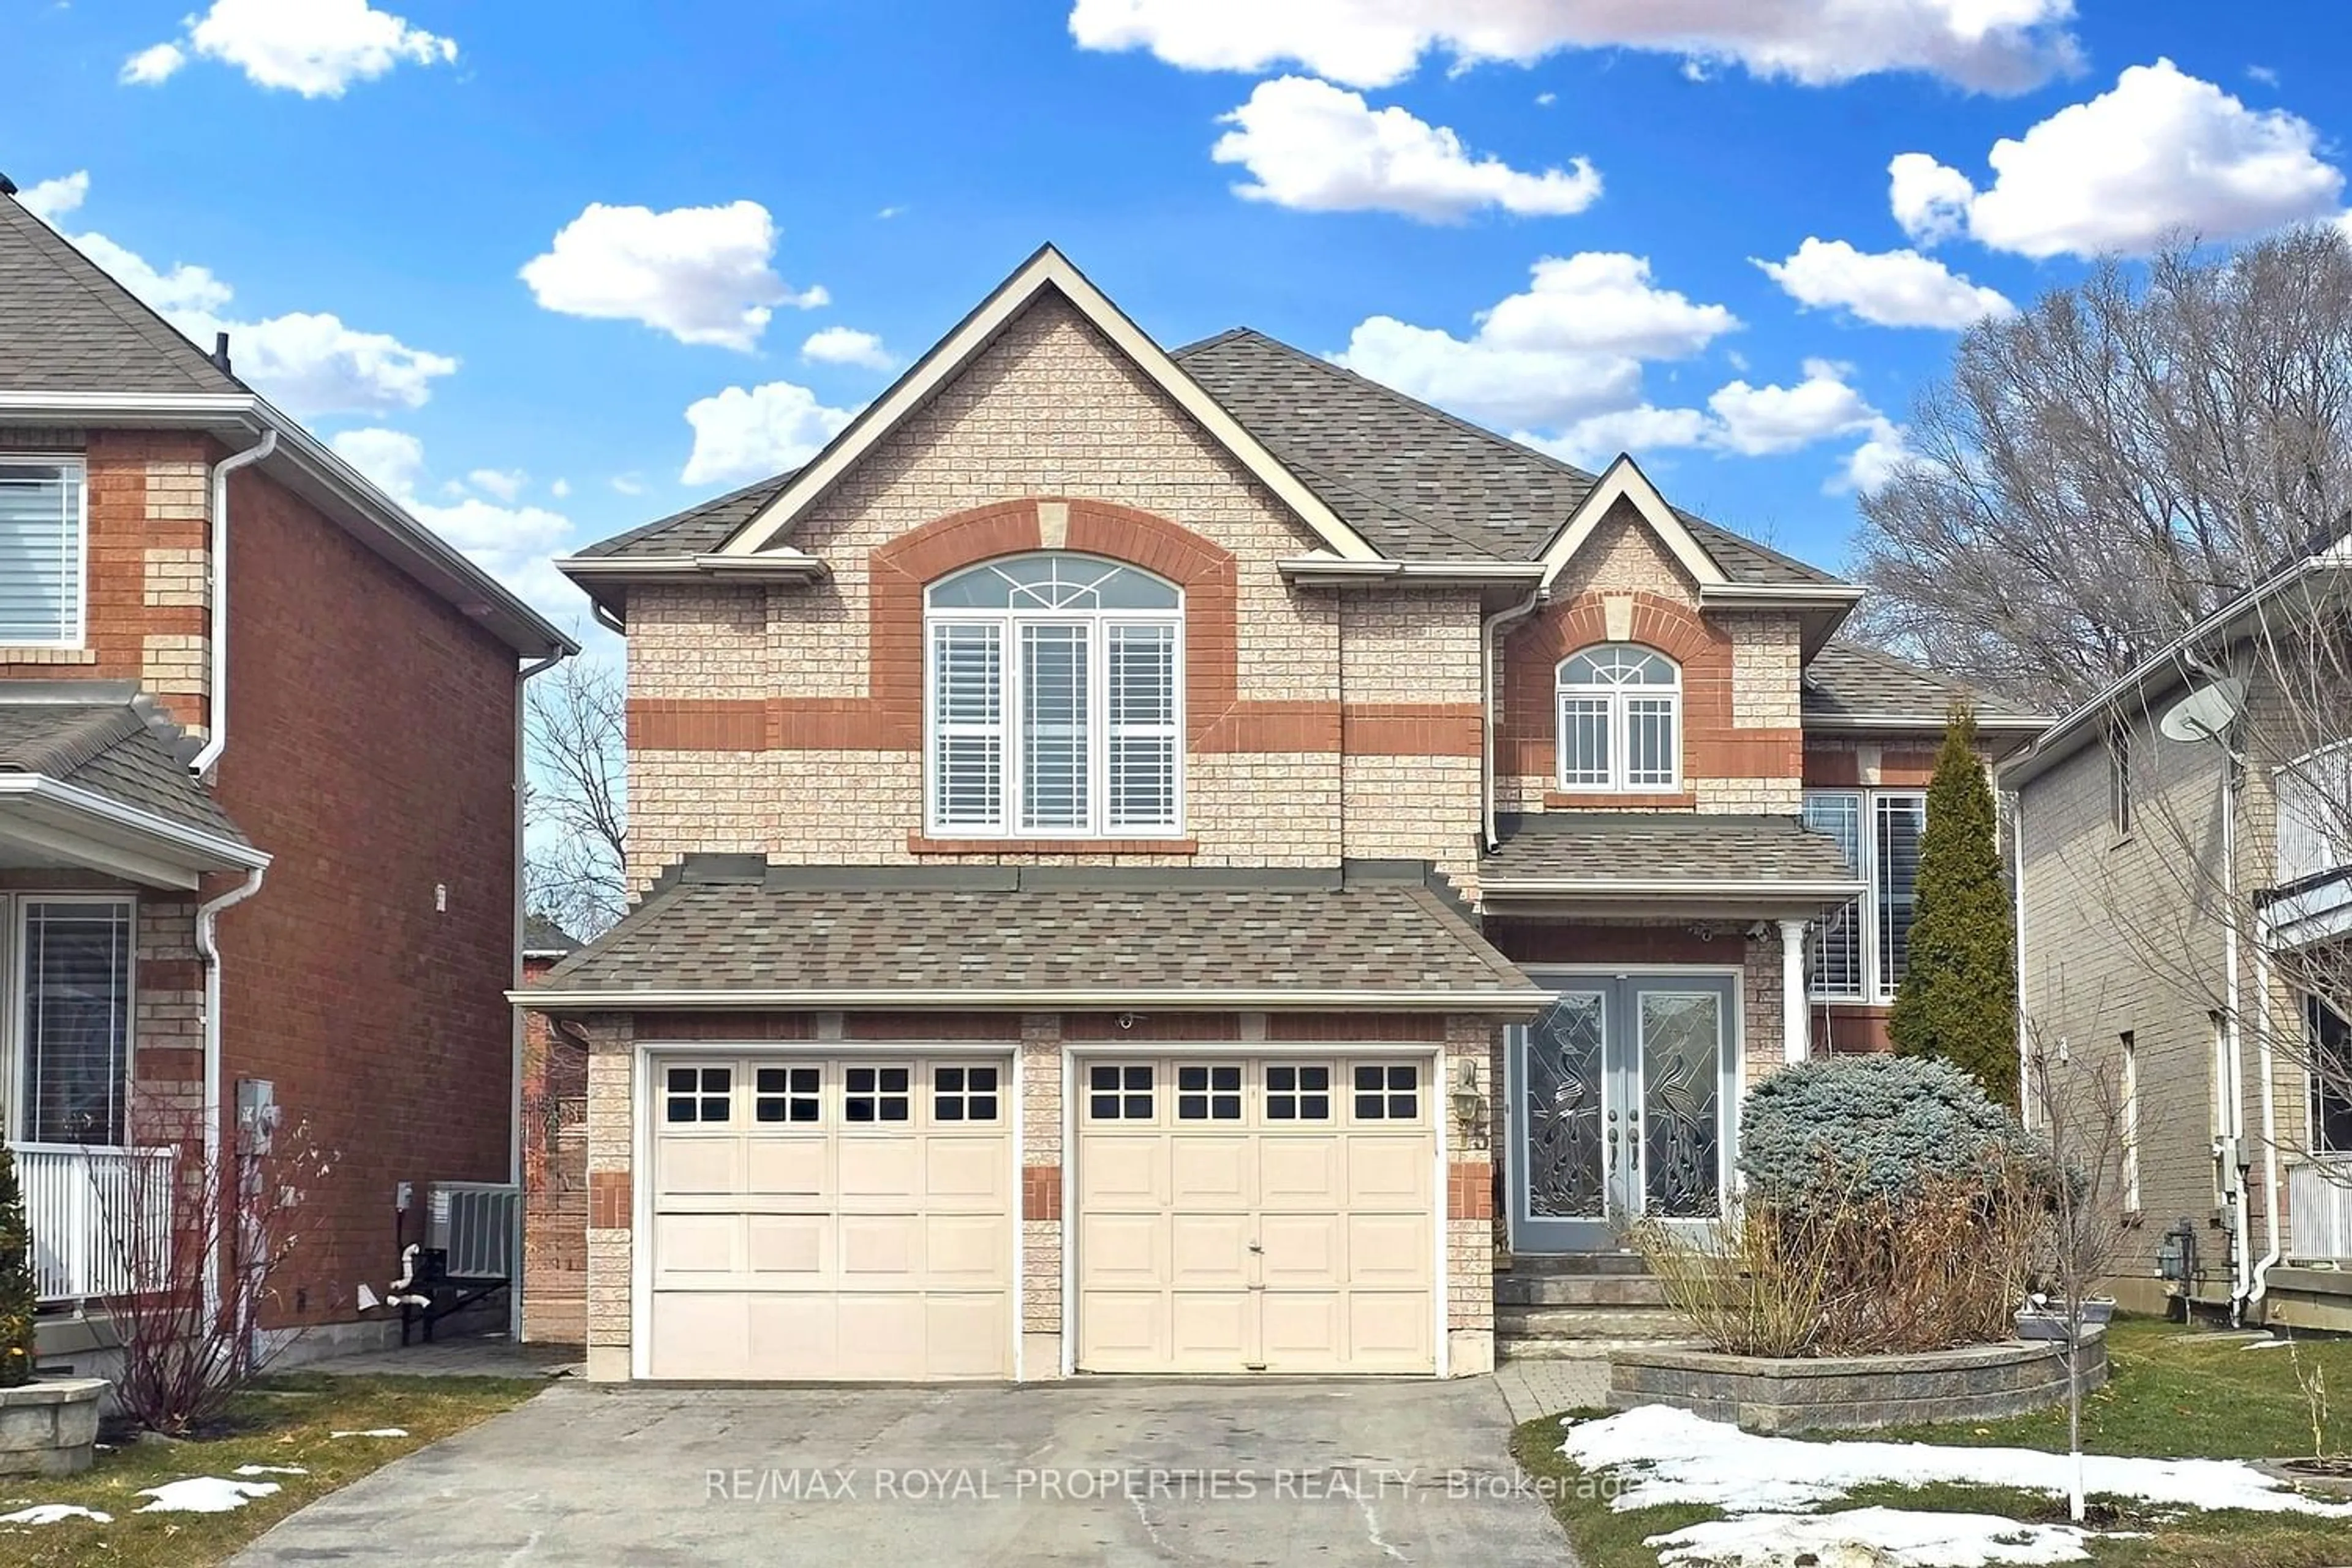 Home with brick exterior material for 15 Wingarden Crt, Whitchurch-Stouffville Ontario M4A 1N1